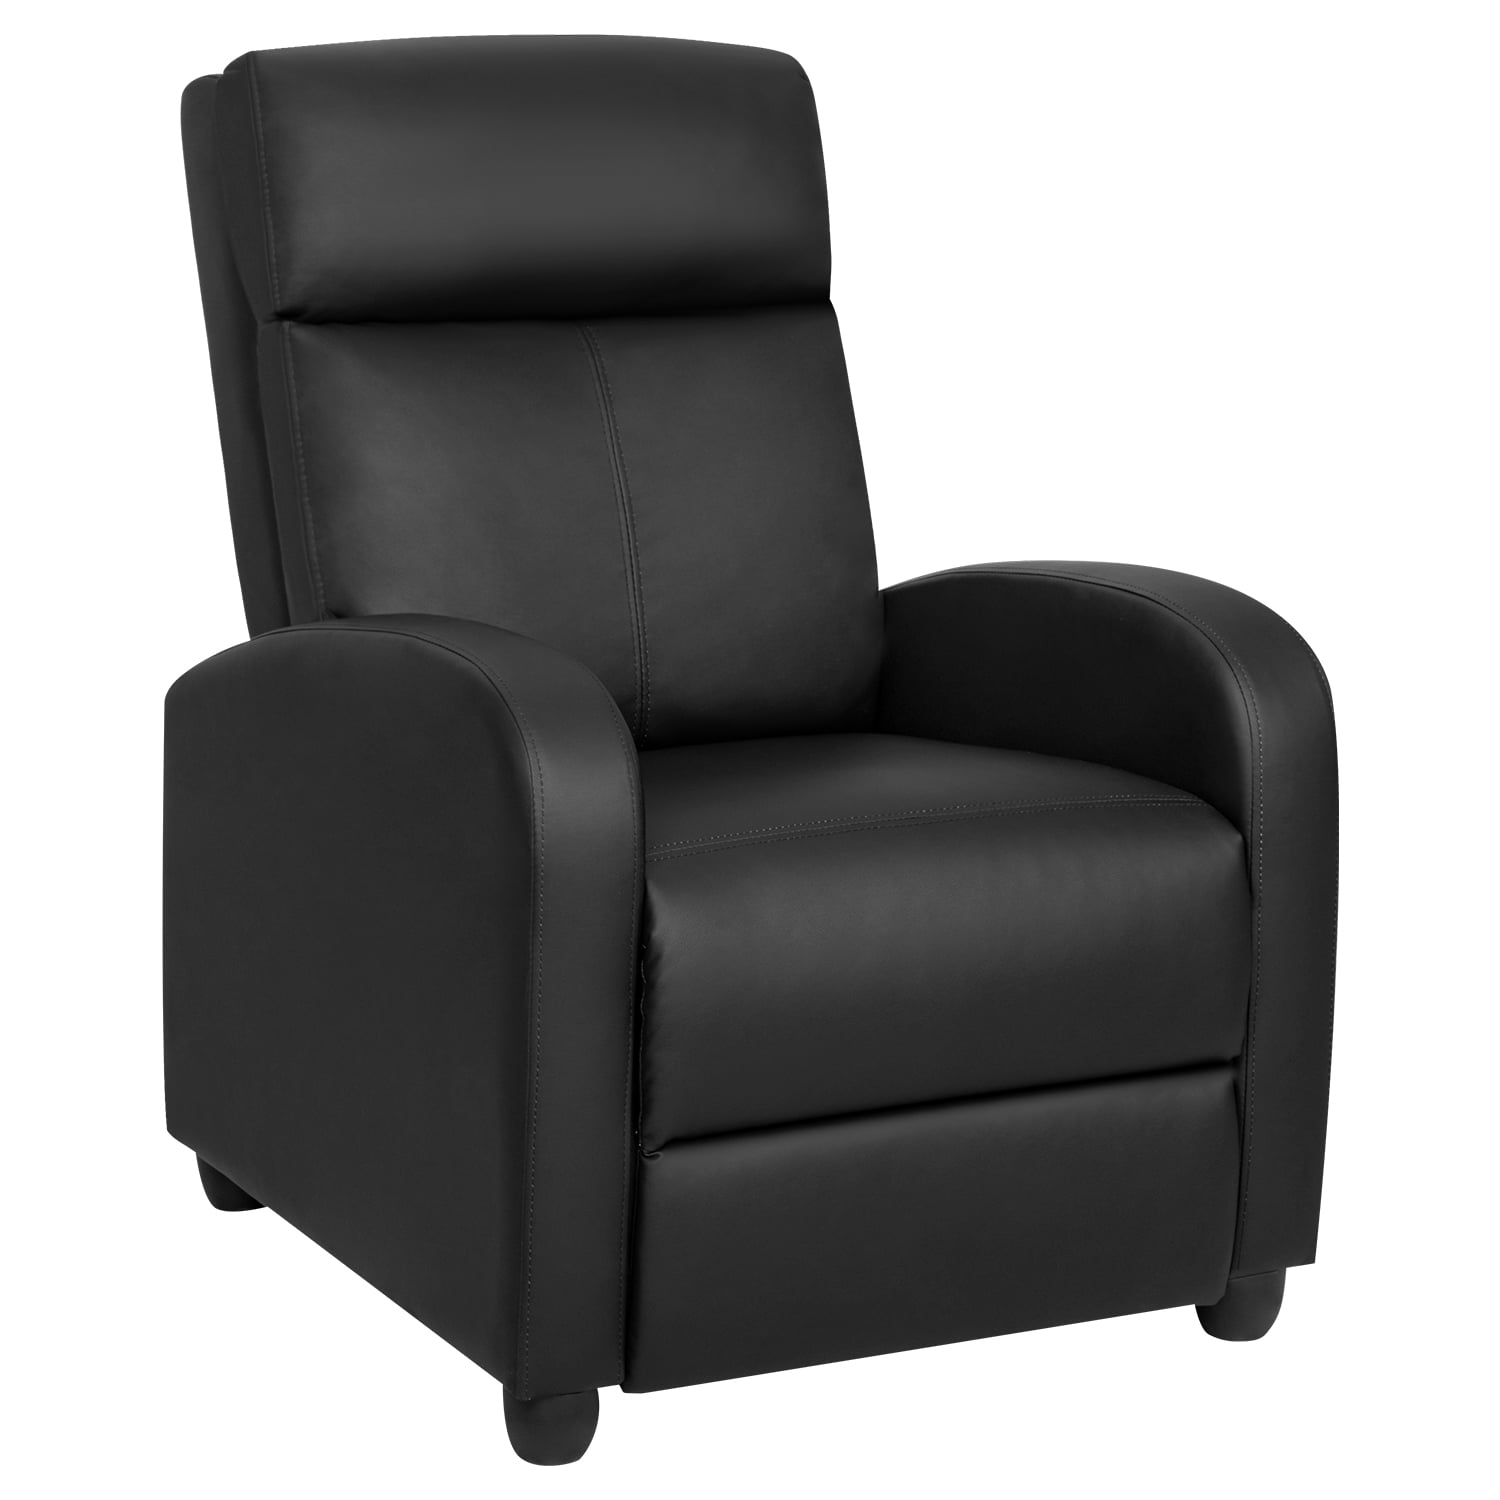 Lacoo Black Home Theater Recliner with Padding